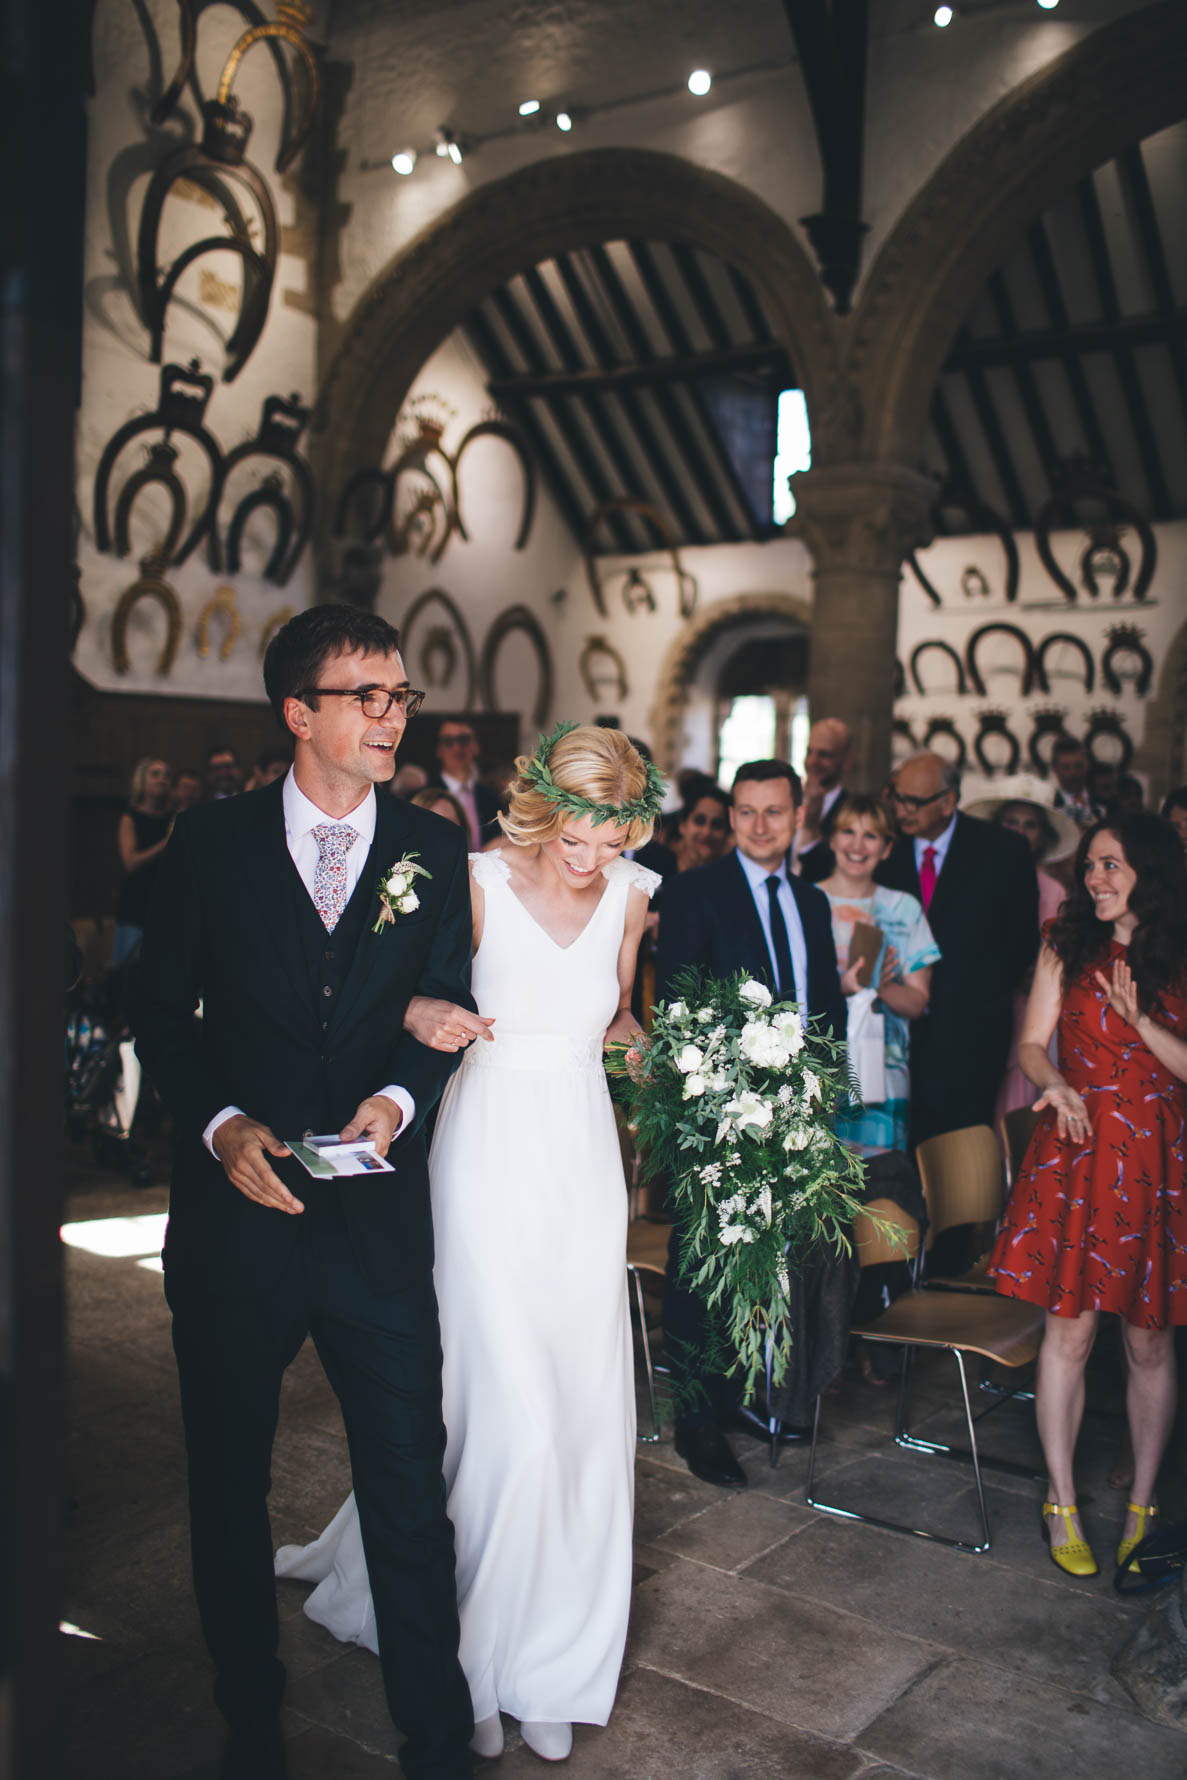 Bride and groom walking out of the Great Hall at Oakham Castle after getting married. The bride is holding a large bouquet of white floers with lots of green foliage. The wedding party can be seen stood in the background